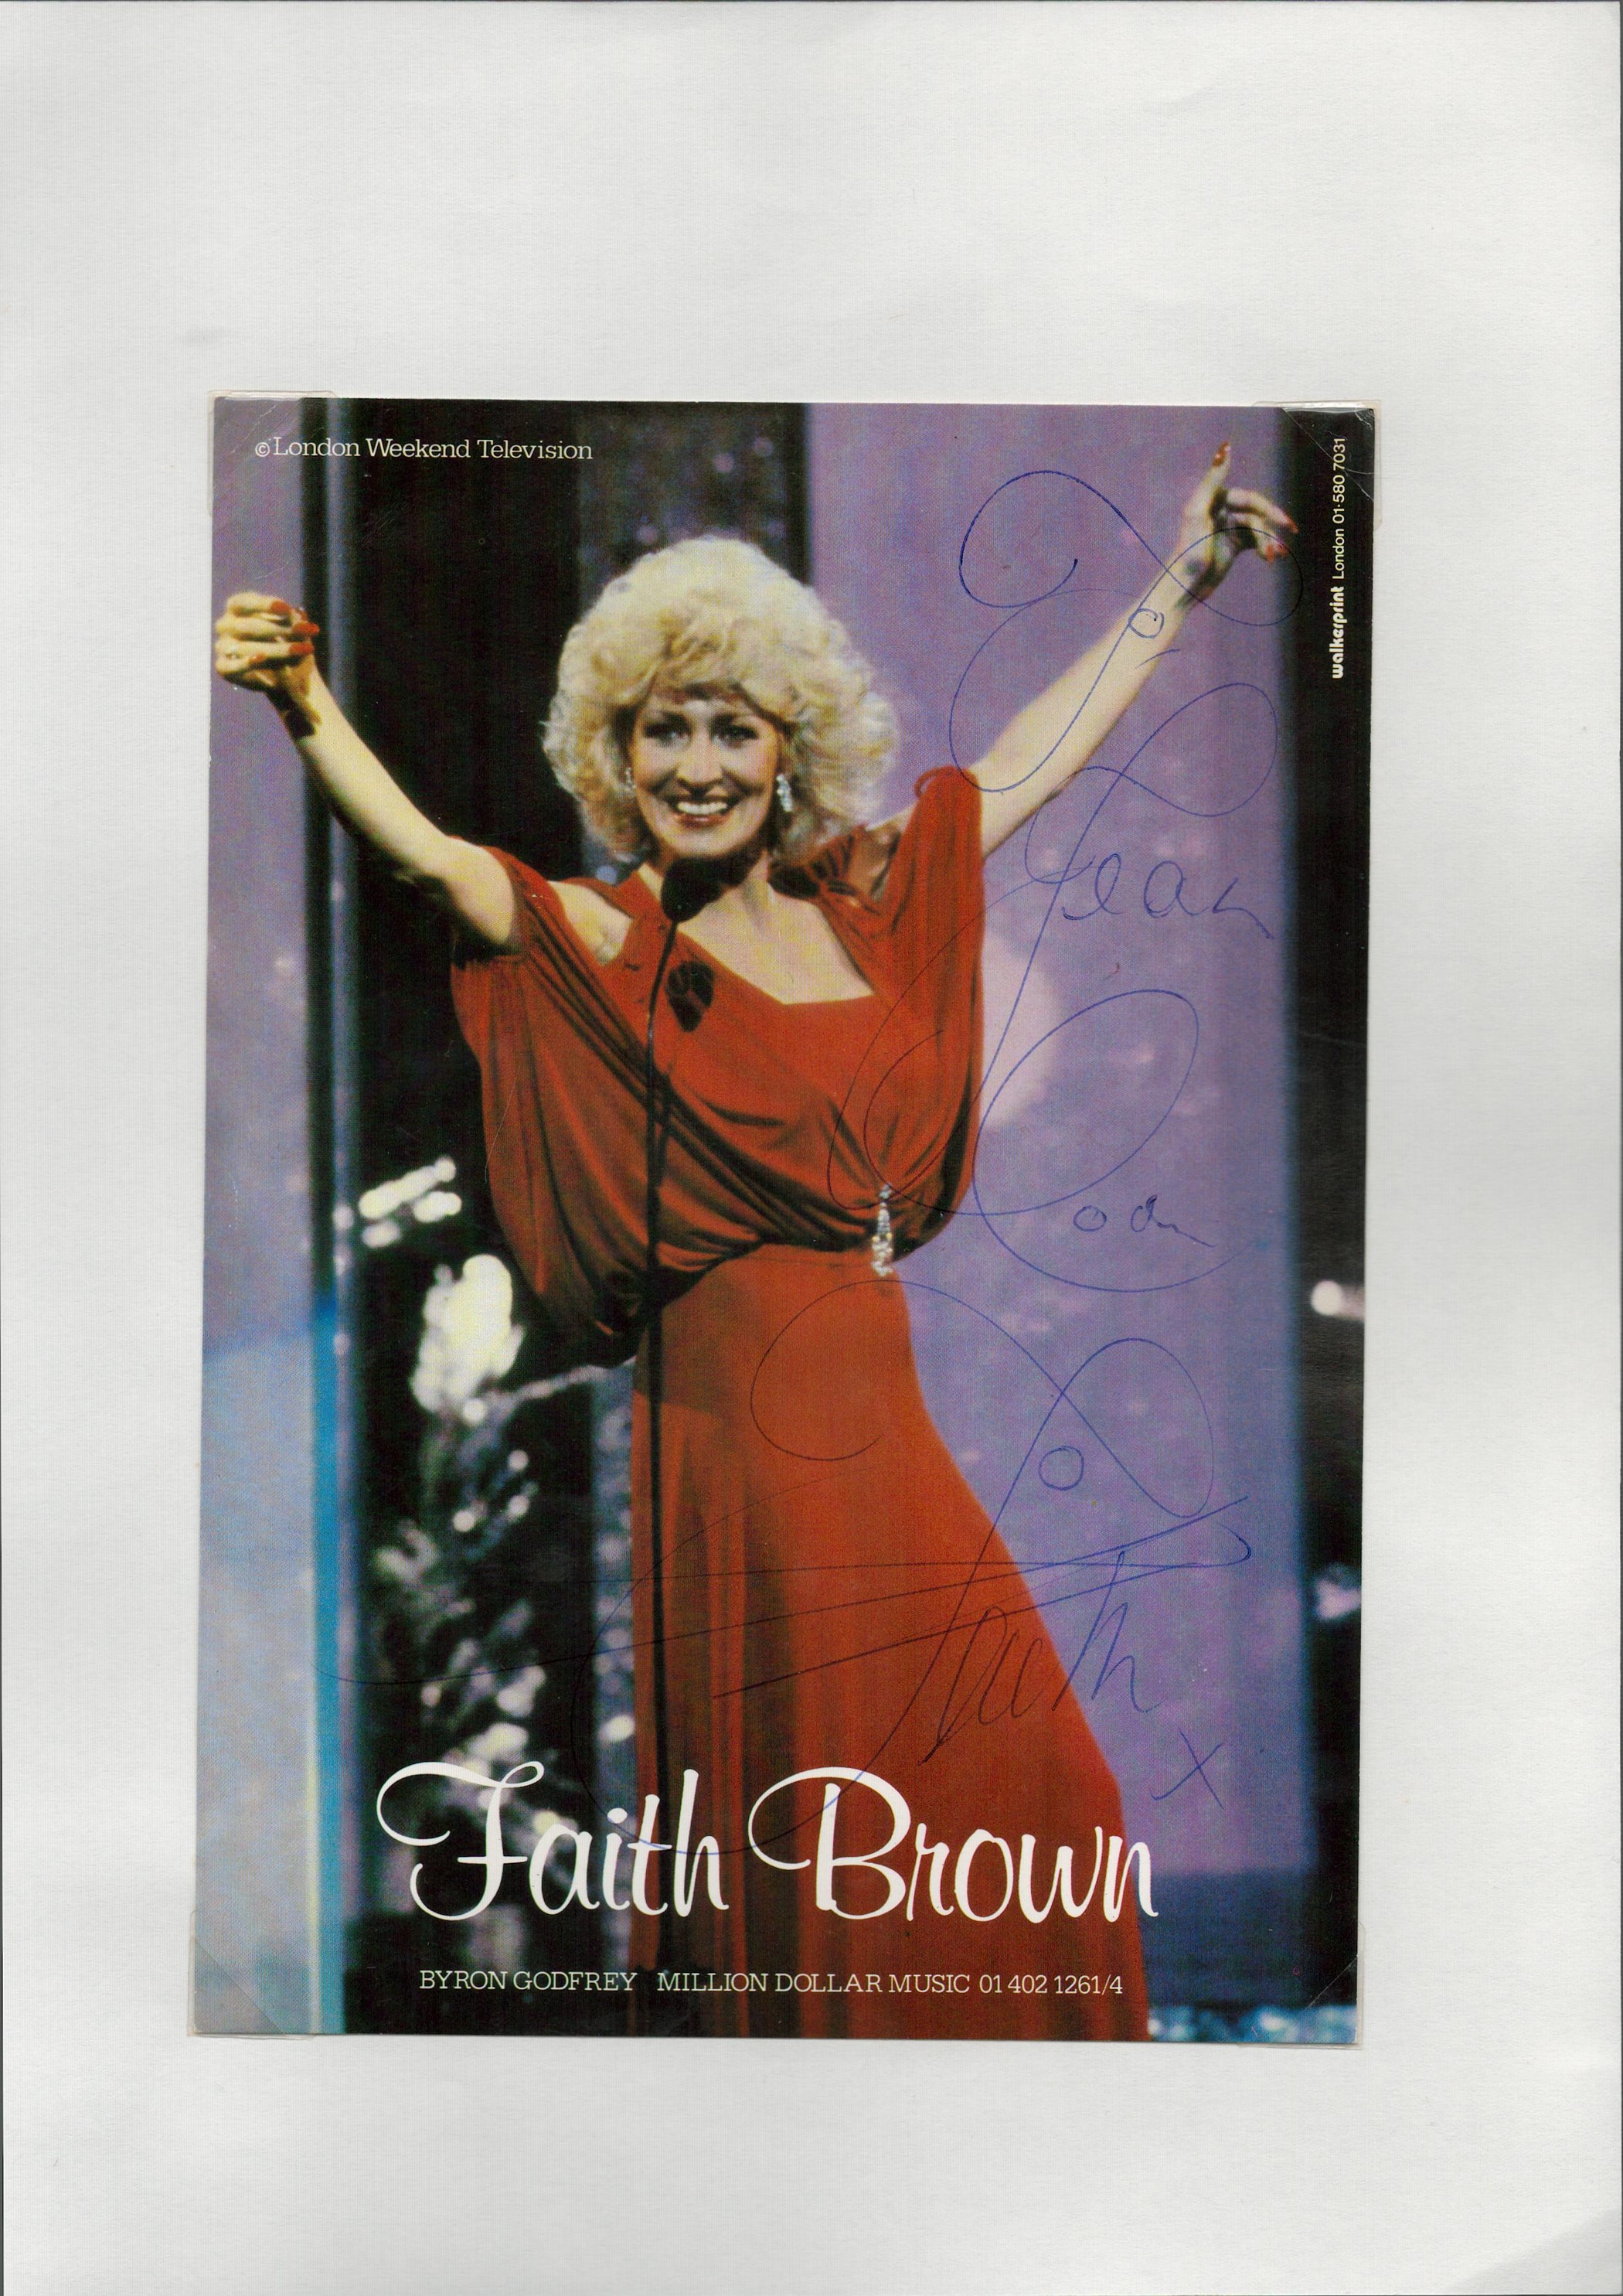 British Entertainer Faith Brown Signed London Weekend Television Colour Promo Card Measuring 8x6